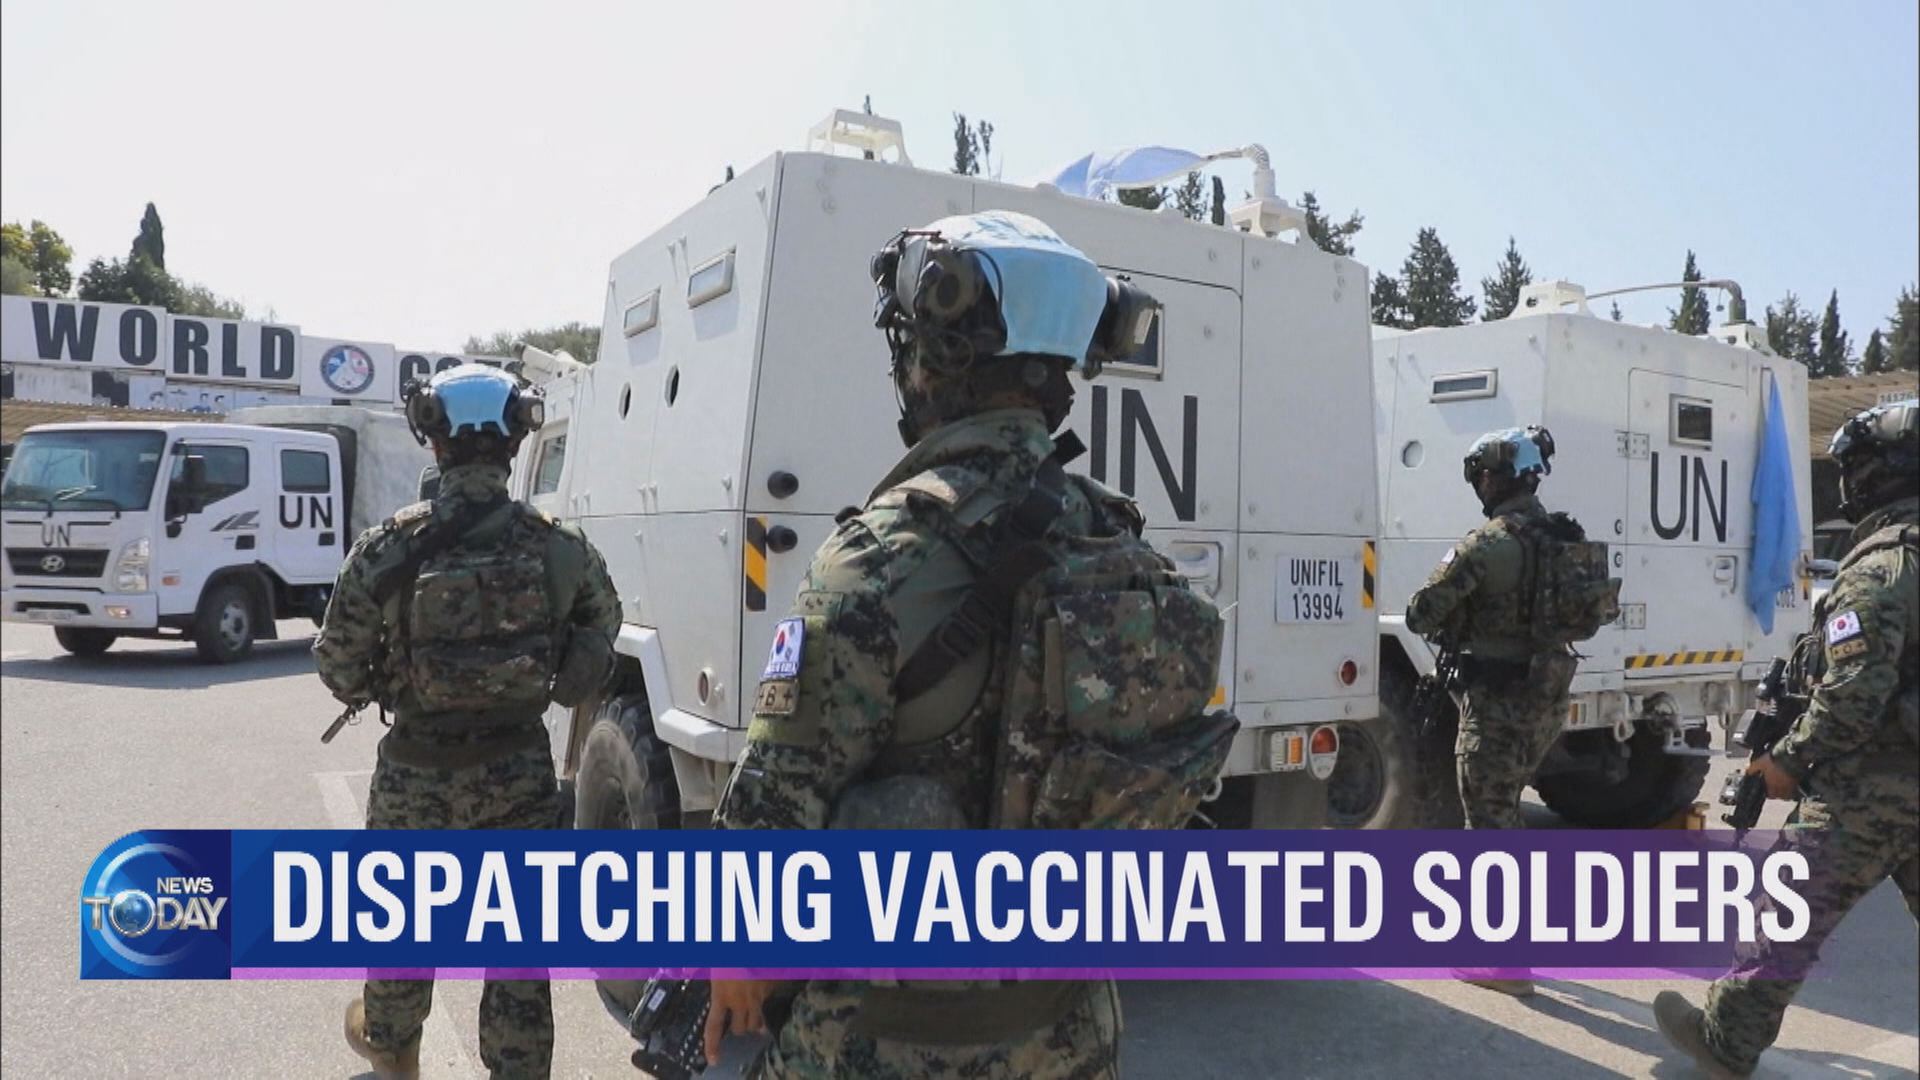 DISPATCHING VACCINATED SOLDIERS